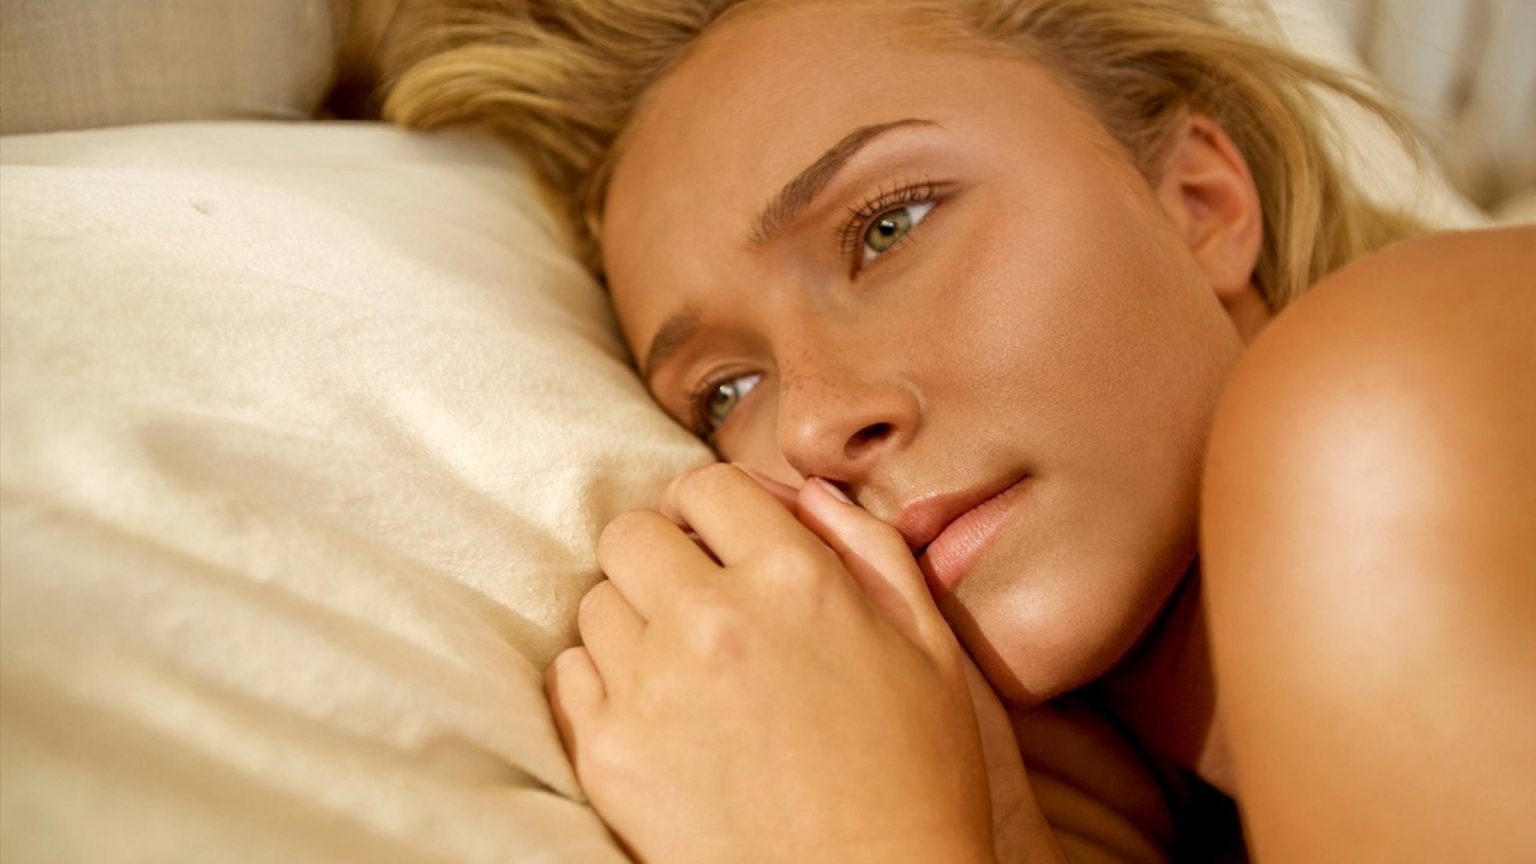 Hayden Panettiere in Bed for 1536 x 864 HDTV resolution